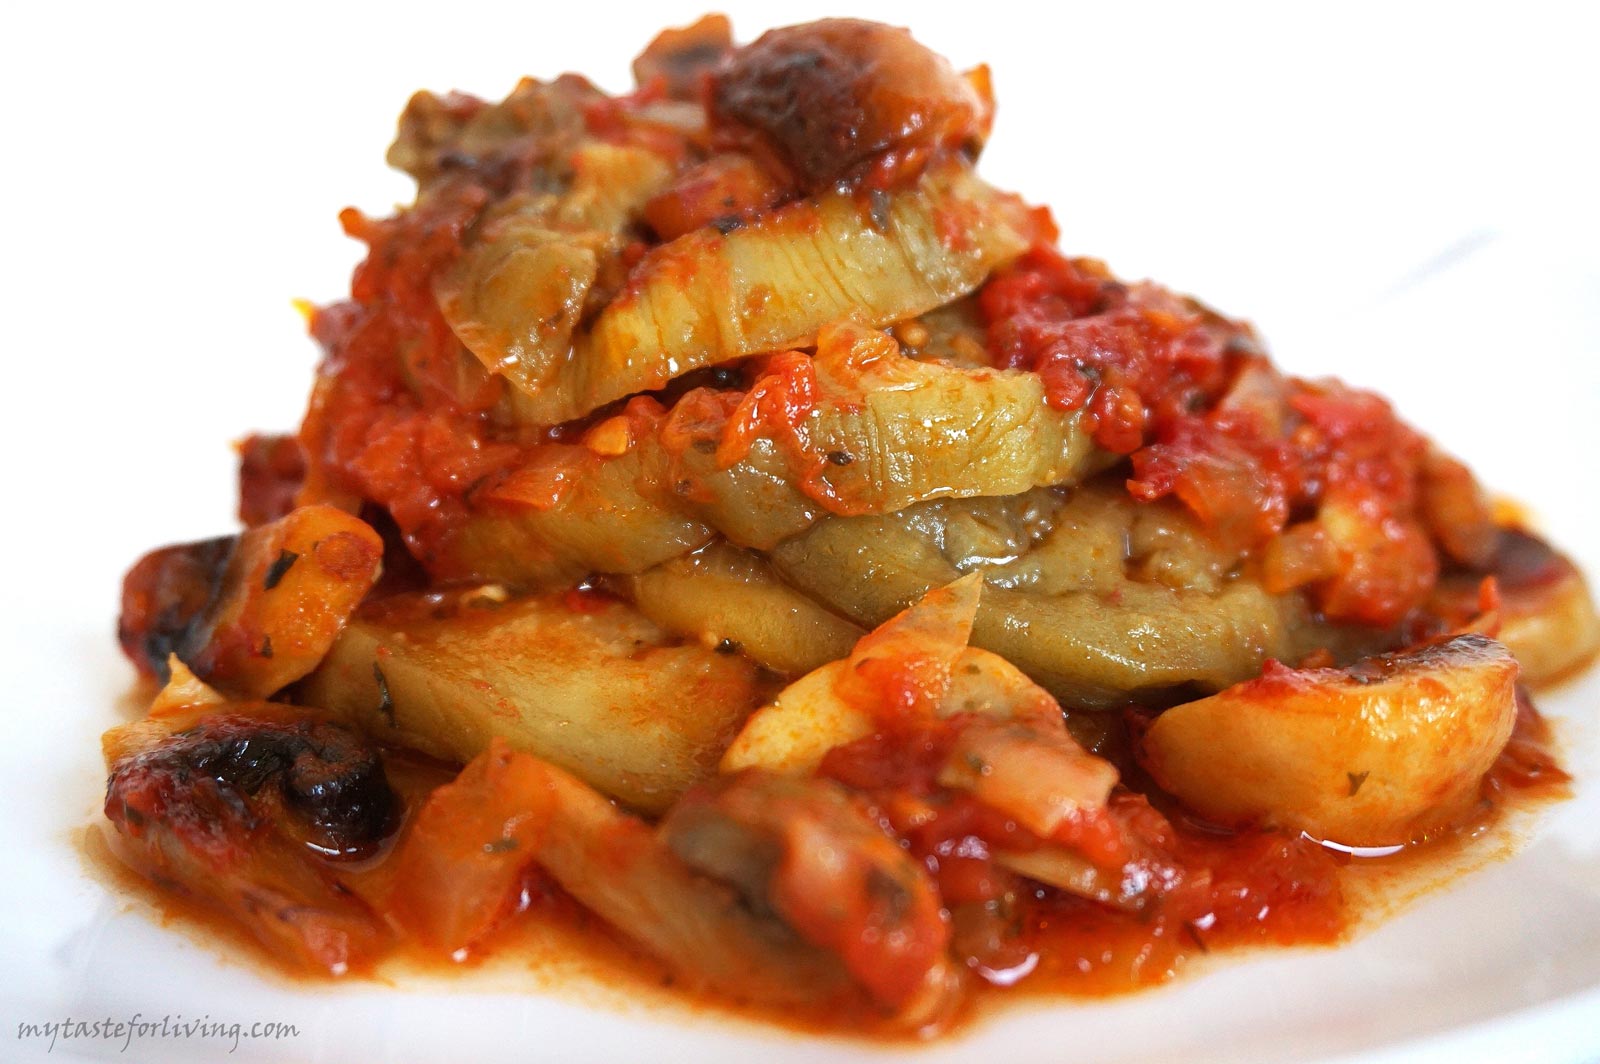 Favorite recipe for baked eggplant with homemade tomato sauce with onions, garlic and mushrooms. Suitable for vegans.